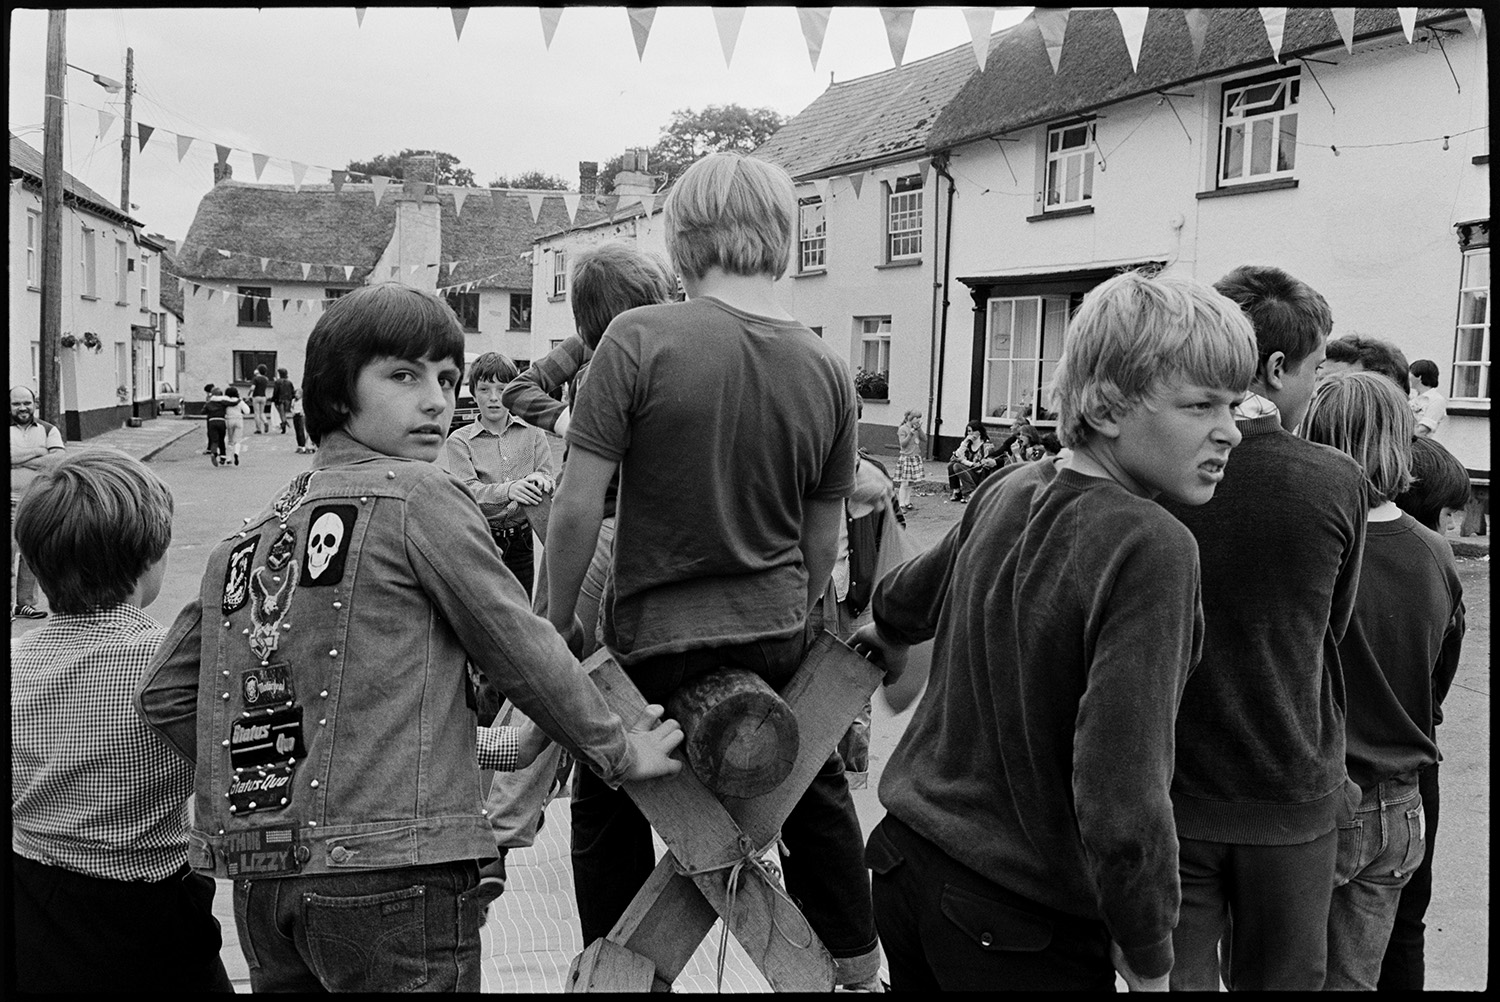 Village Fair, folk clog dancing. Fancy dress, spectators. 
[Teenage boys playing on a greasy pole game at Winkleigh Fair. One boy is wearing a jacket with badges and the street is decorated with bunting.]